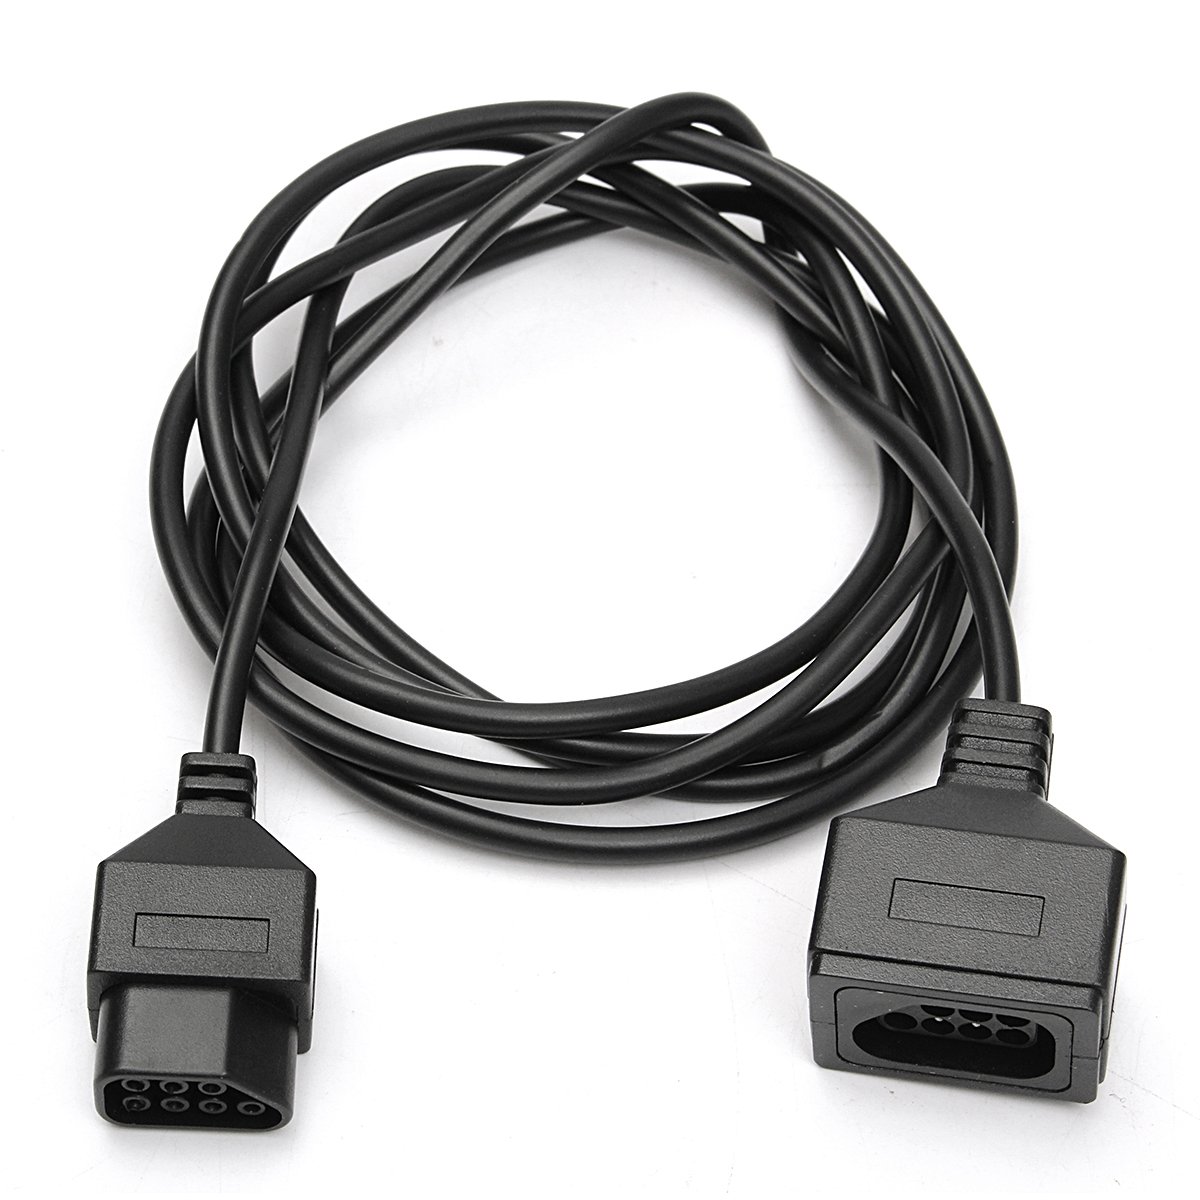 6inch Extension Cable Cord for Nintendo NES Game Controller Gamepad Mini Classic Bit 1